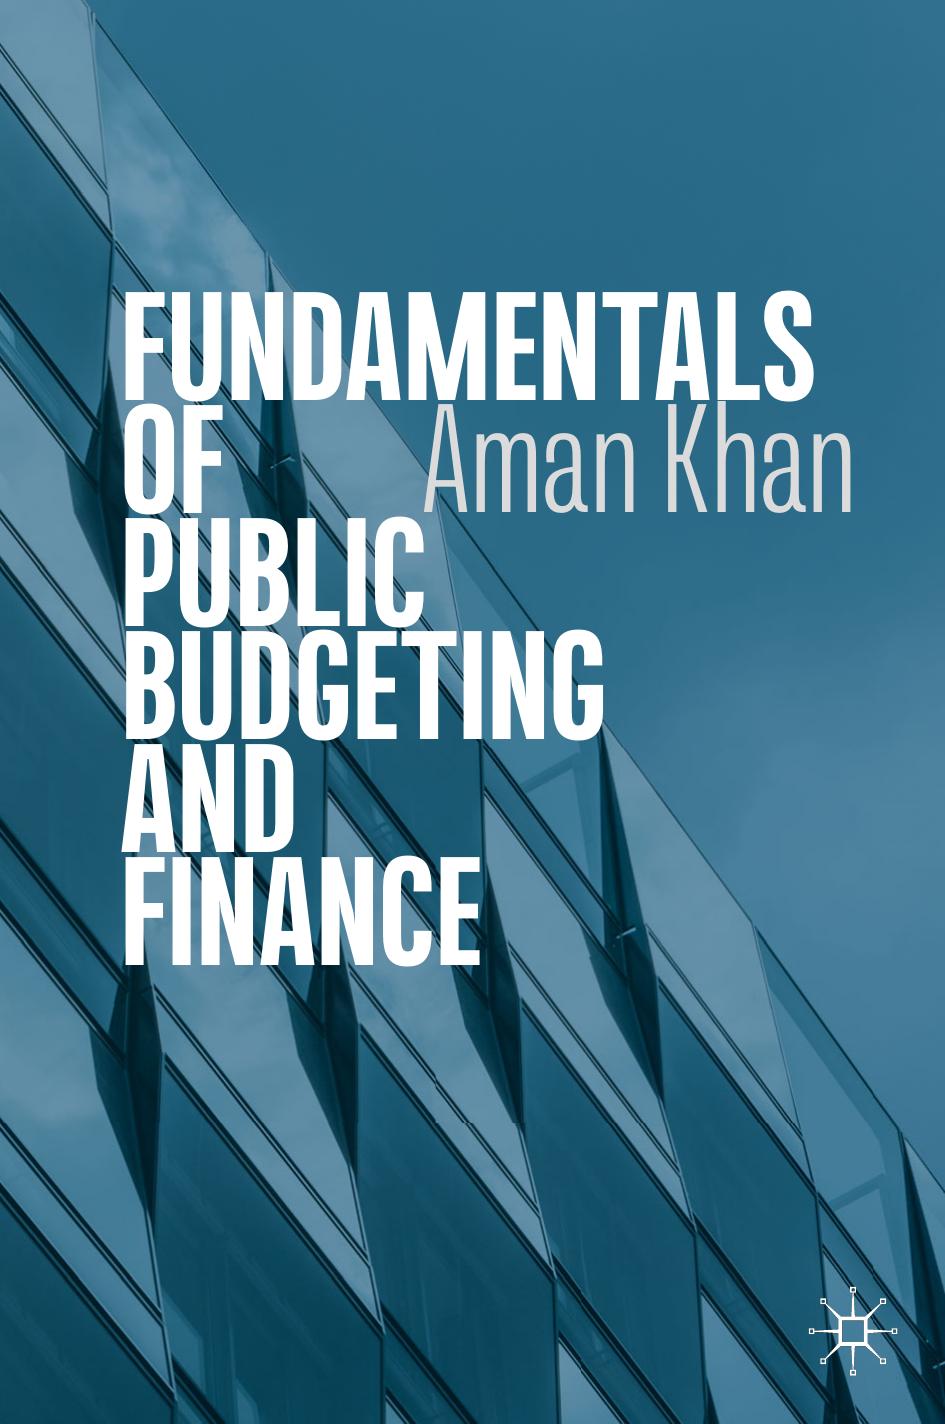 Fundamentals of Public Budgeting and Finance by Aman Khan